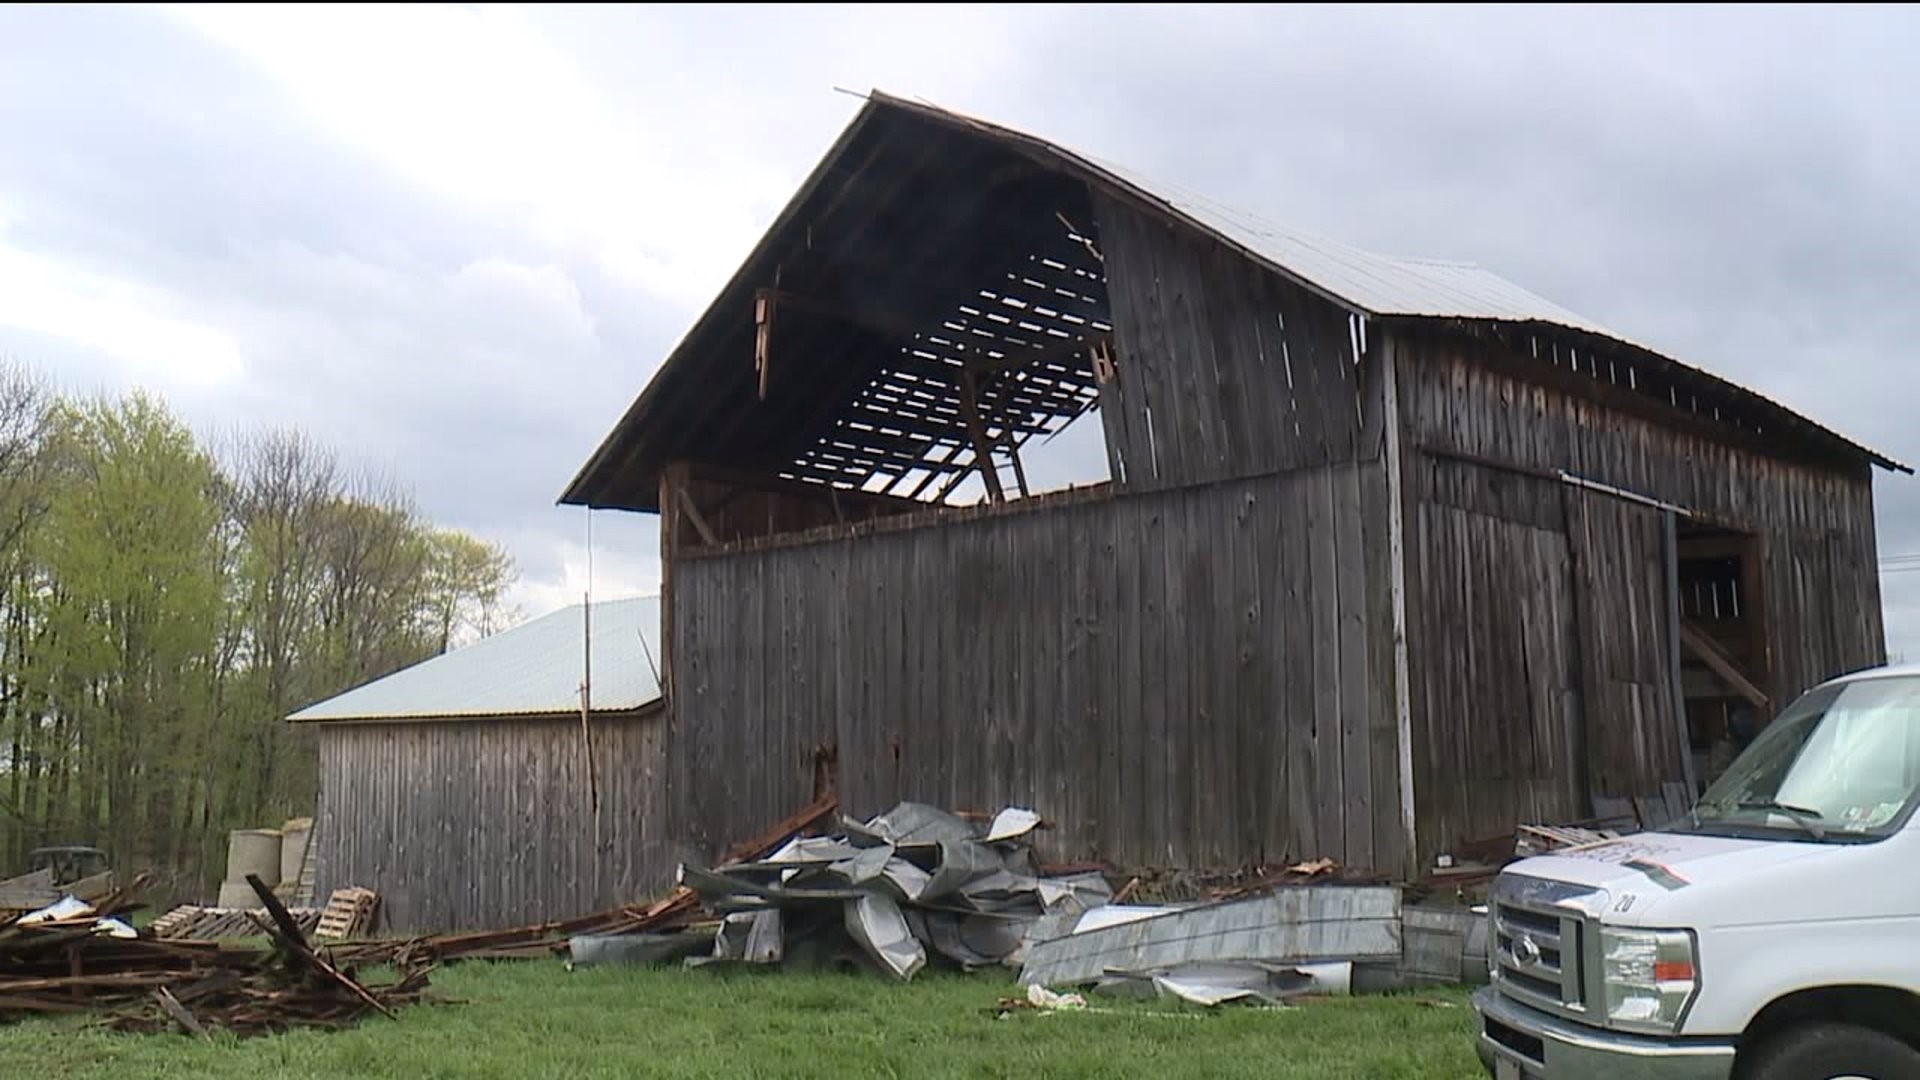 Barn from 1800s Heavily Damaged by Storms